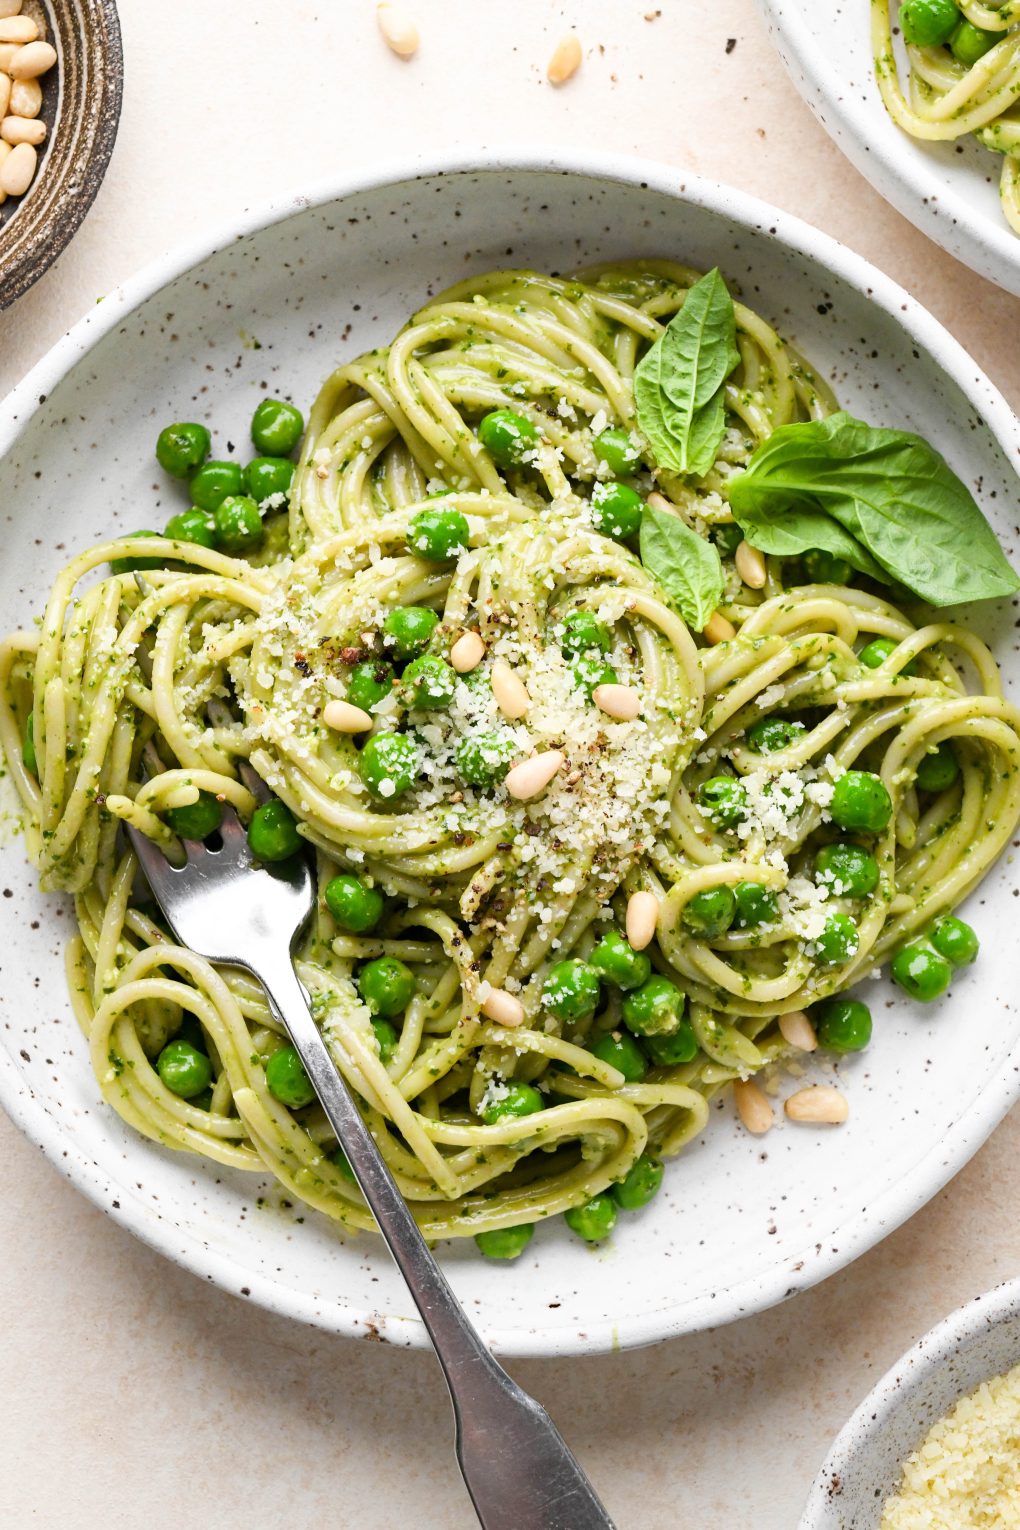 Pesto pasta made with spaghetti twirled in a speckled ceramic bowl and topped with pine nuts and grated parmesan.